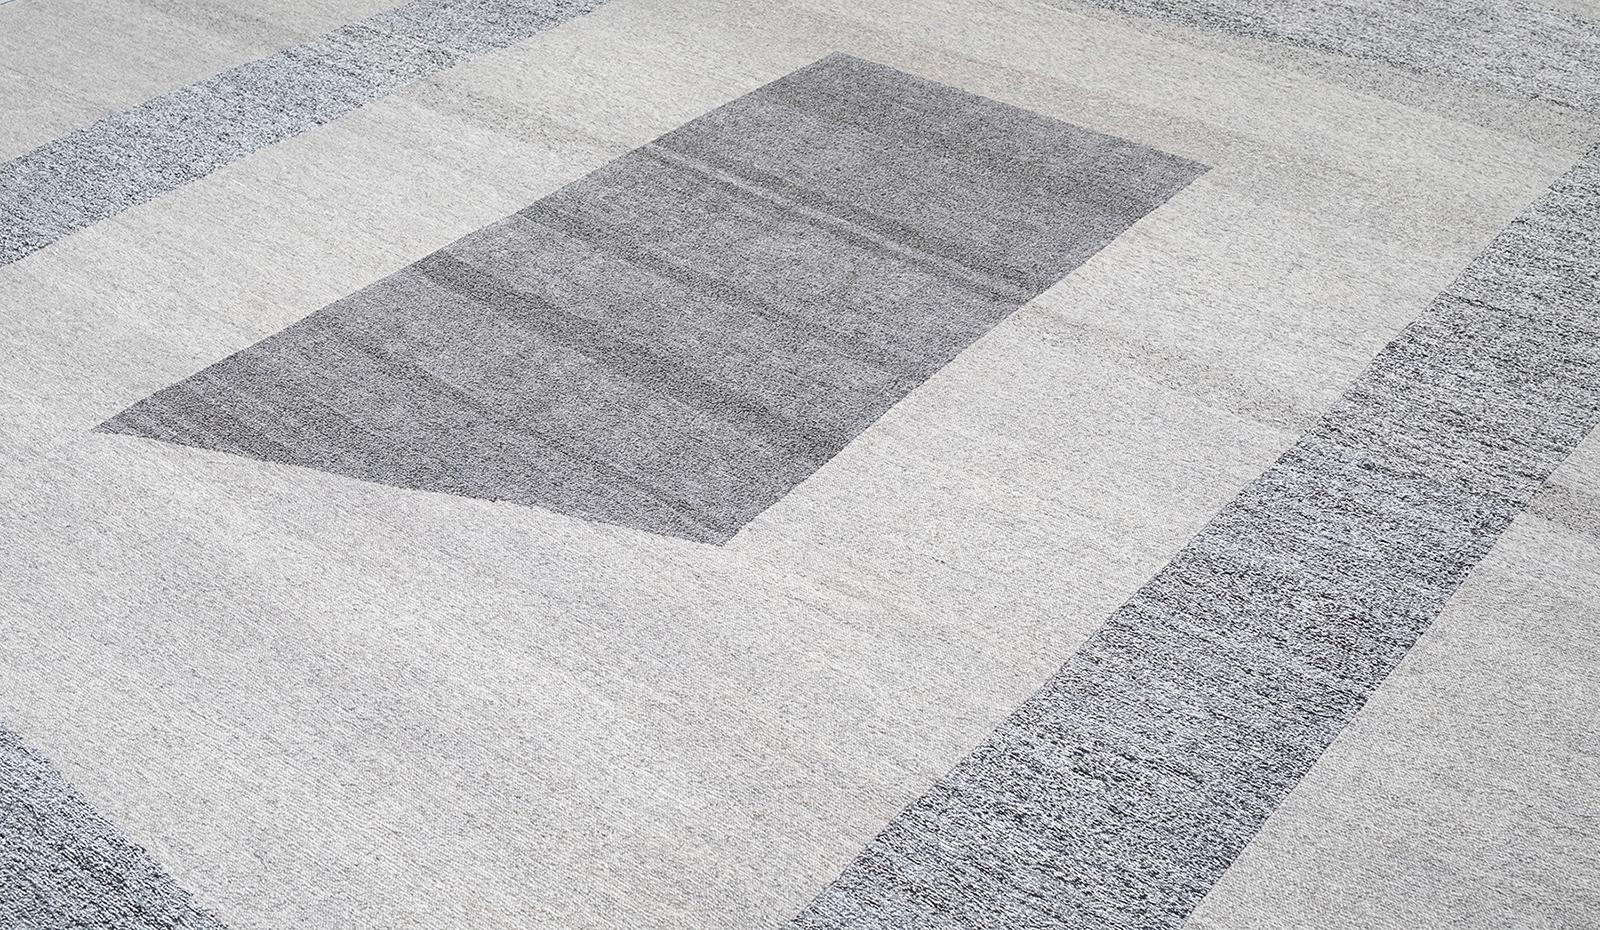 This Pelas rug titled, Sonic, is a flatweave made with handspun wool and natural dyes. It is inspired by the antique kilims that are native to the Kurdish region in Iran. Nasiri continues their rich tradition of rug making by applying the same